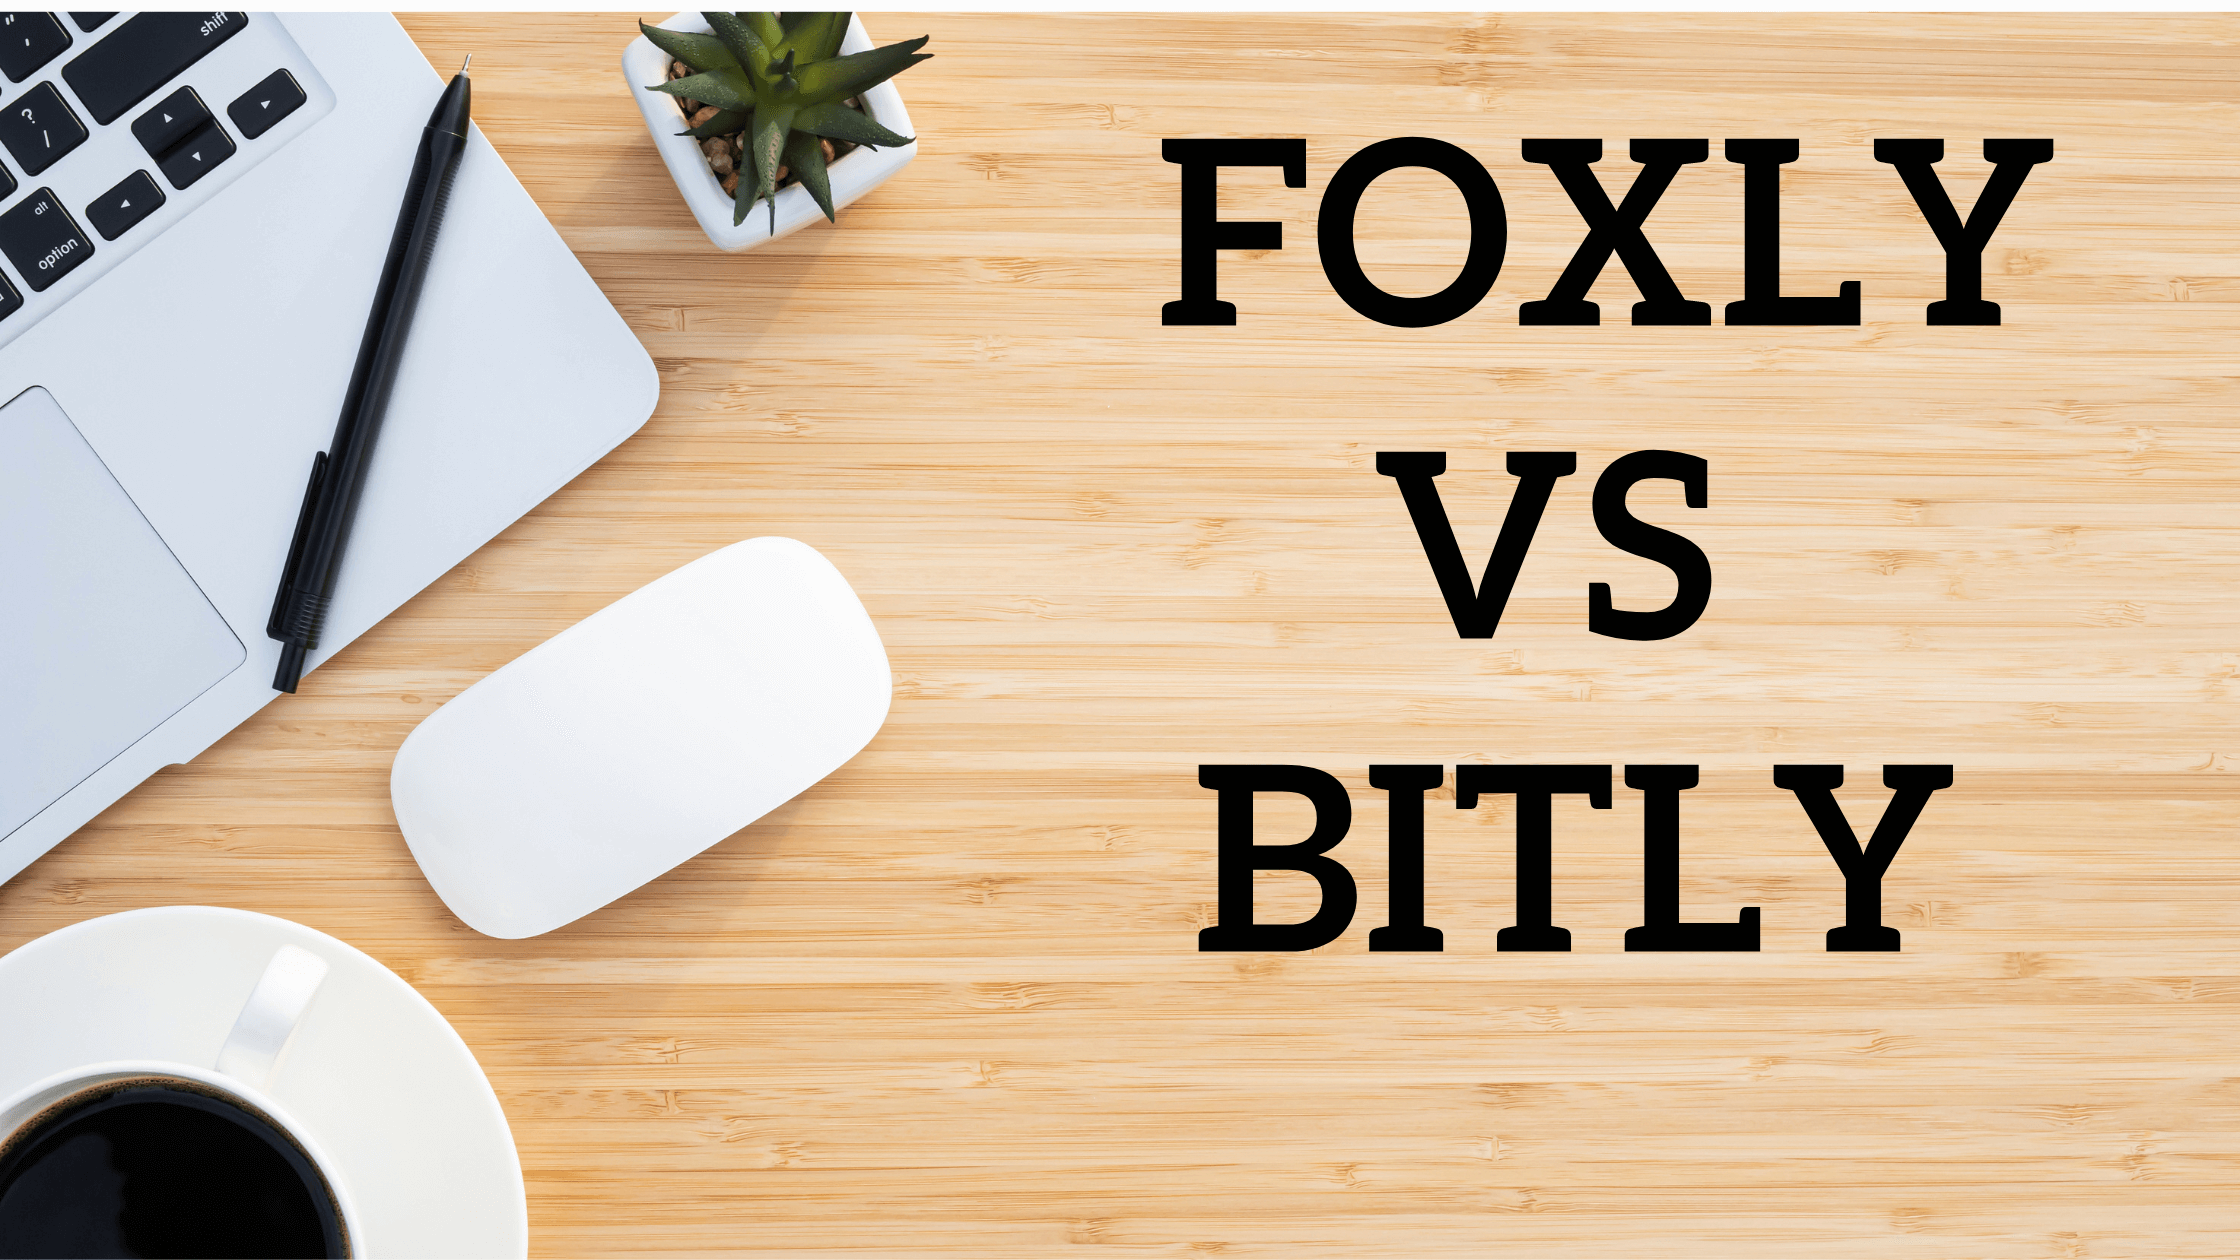  Foxly vs Bitly: Choosing the Right URL Shortener for Your Needs